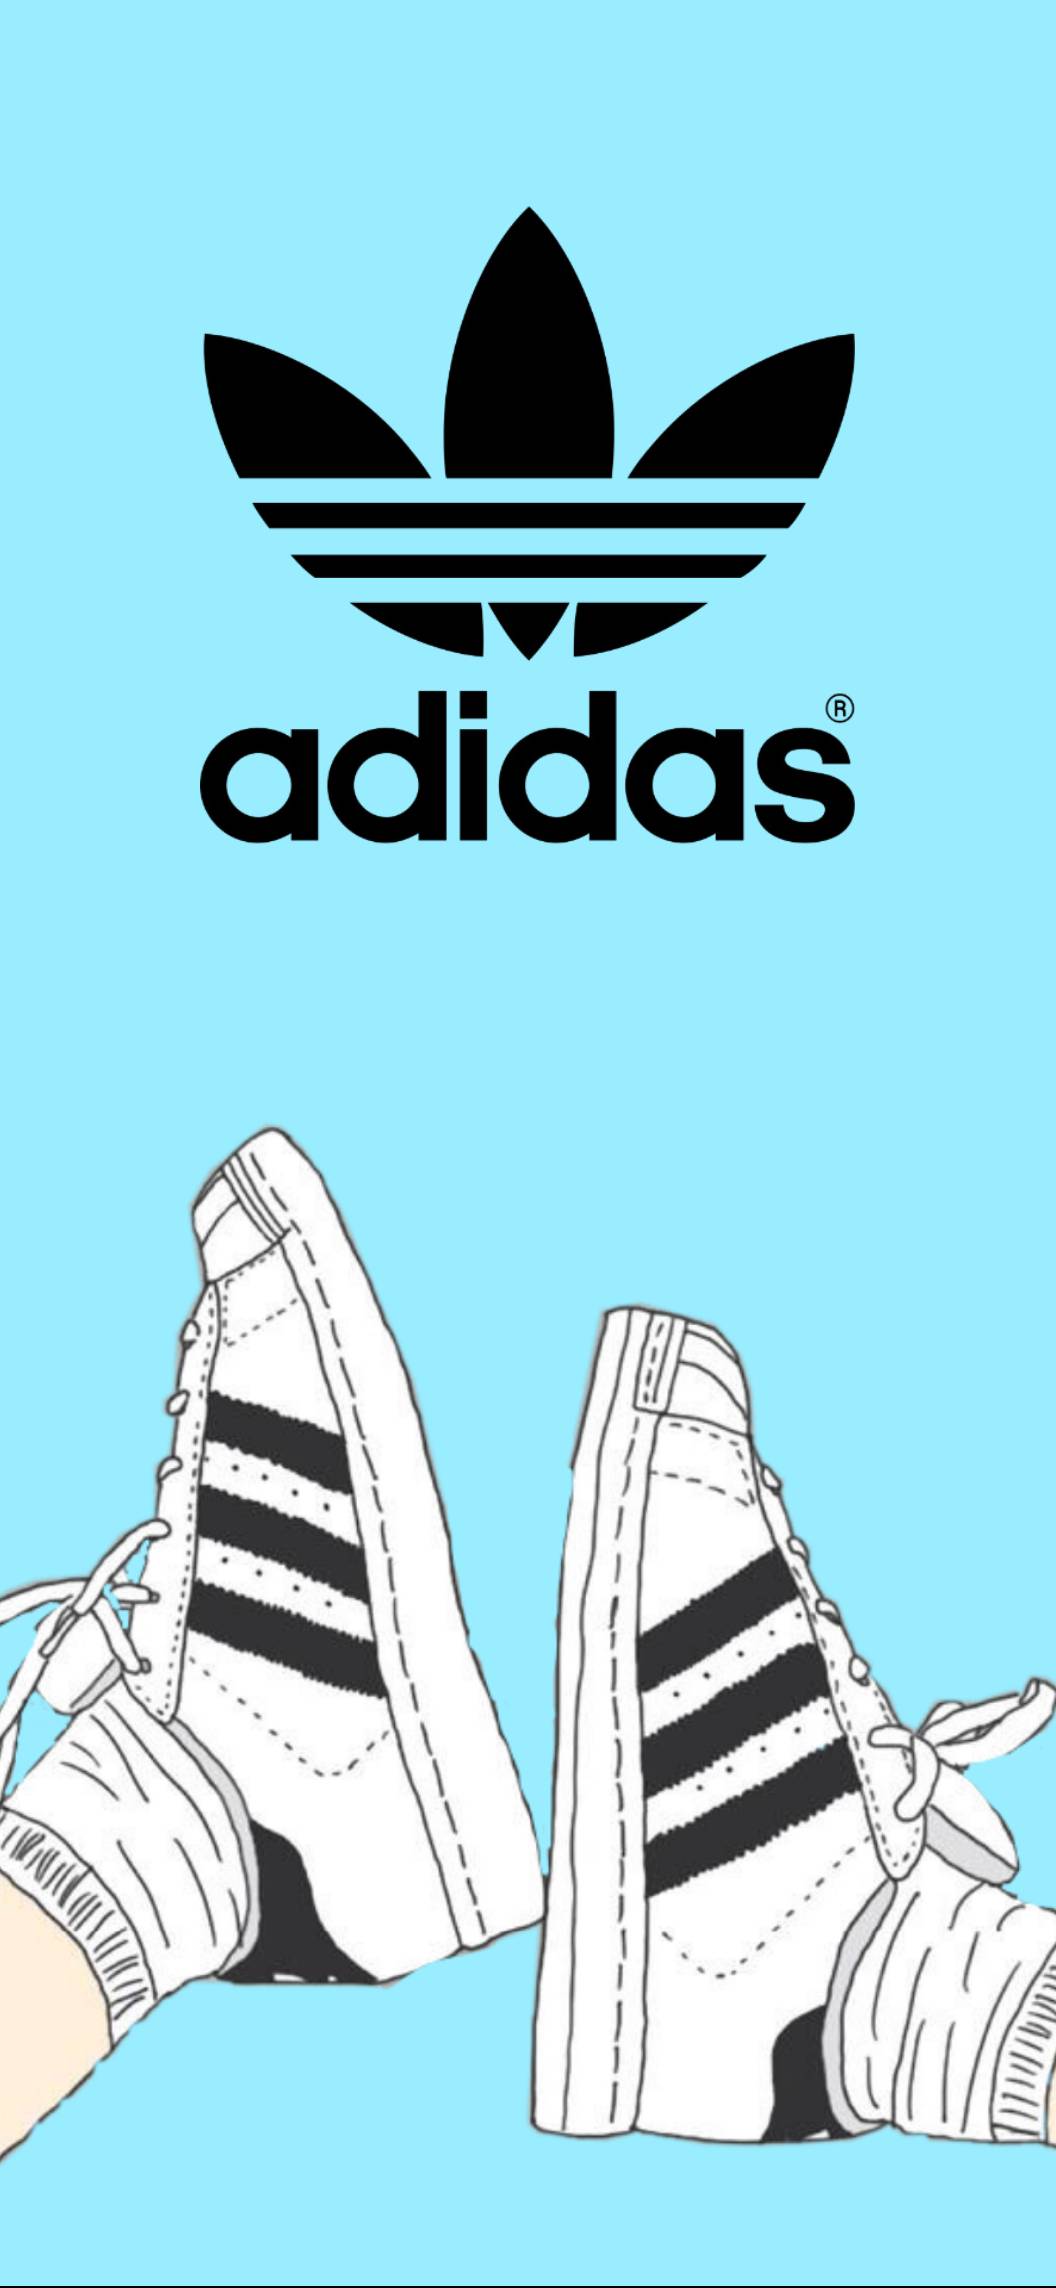 HD Wallpapers Of Adidas